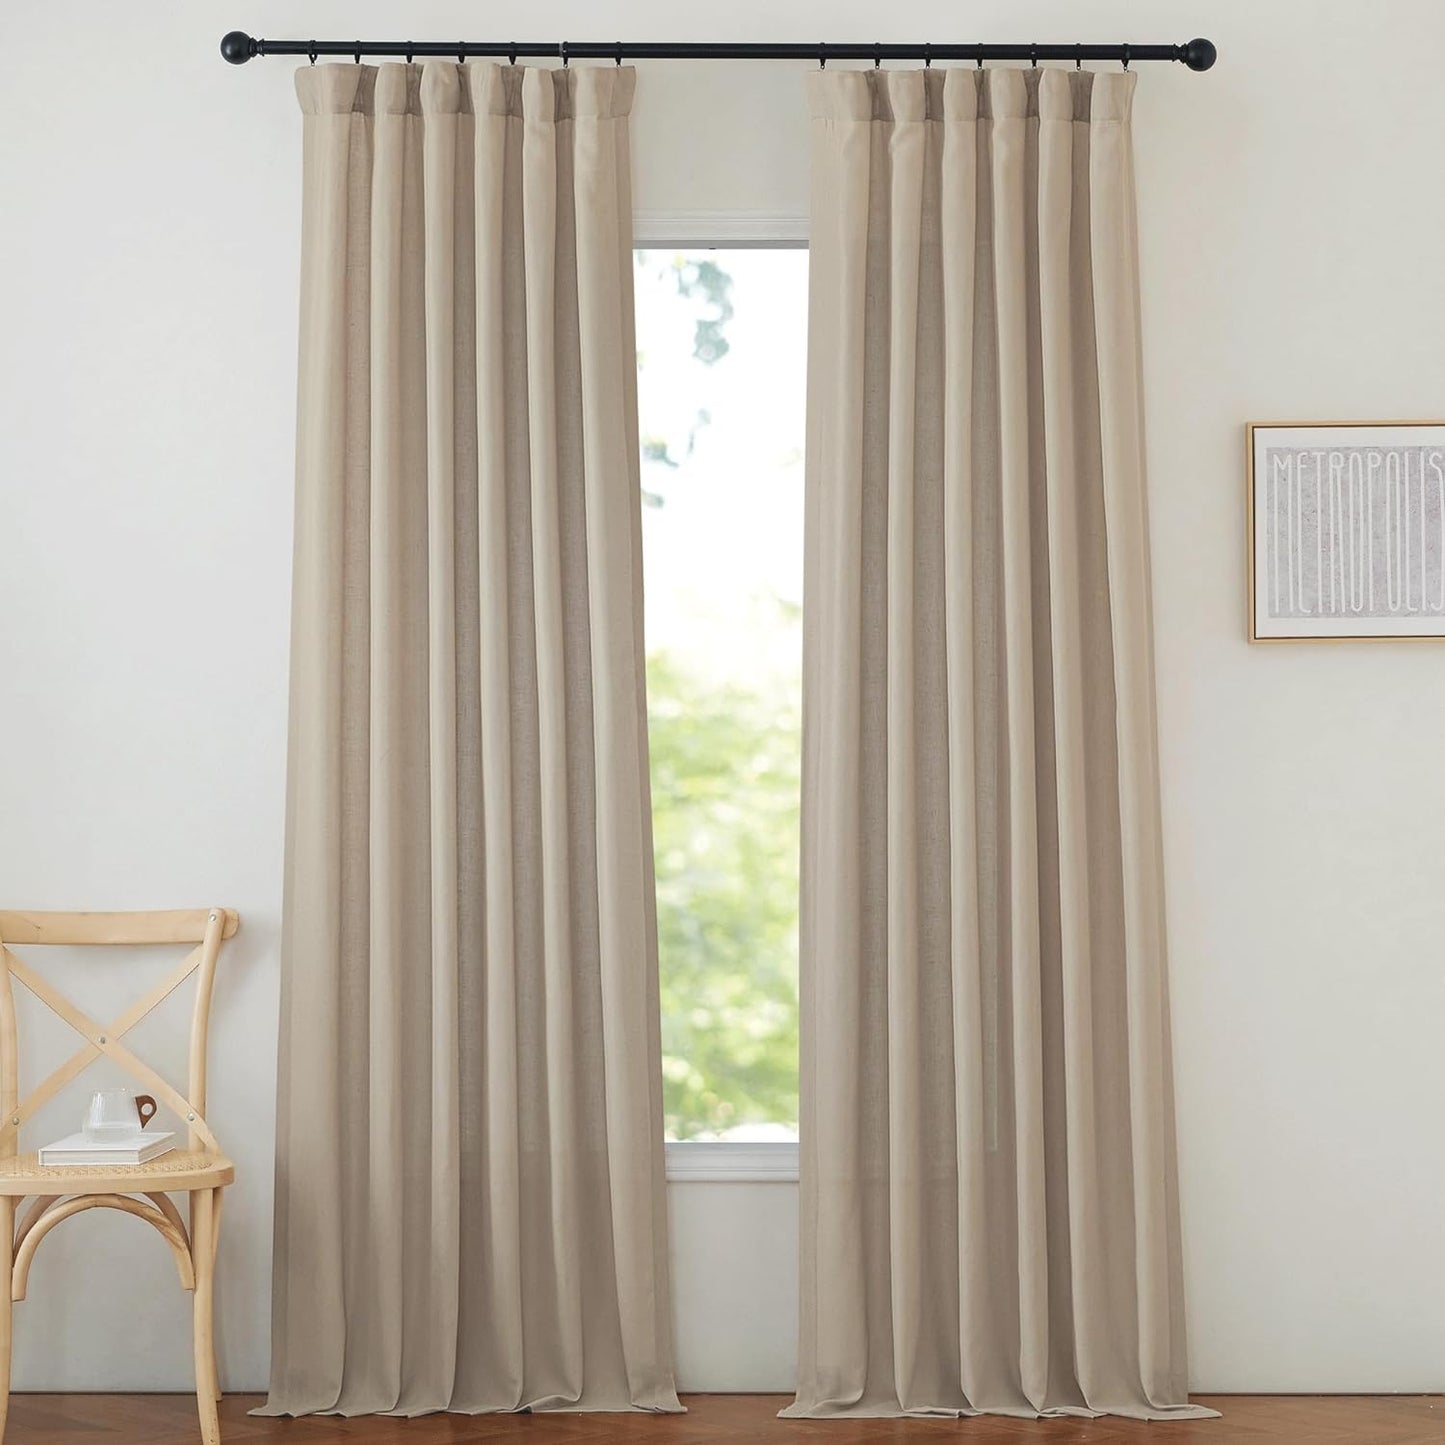 NICETOWN Taupe Thick Linen Curtains 96 Inches Long, Pinch Pleated Flax Linen Curtains Privacy Added Window Treatments with Light Filtering Drapes for Bedroom/Living Room, W50 X L96, 2 Panels  NICETOWN Camel W50 X L90 